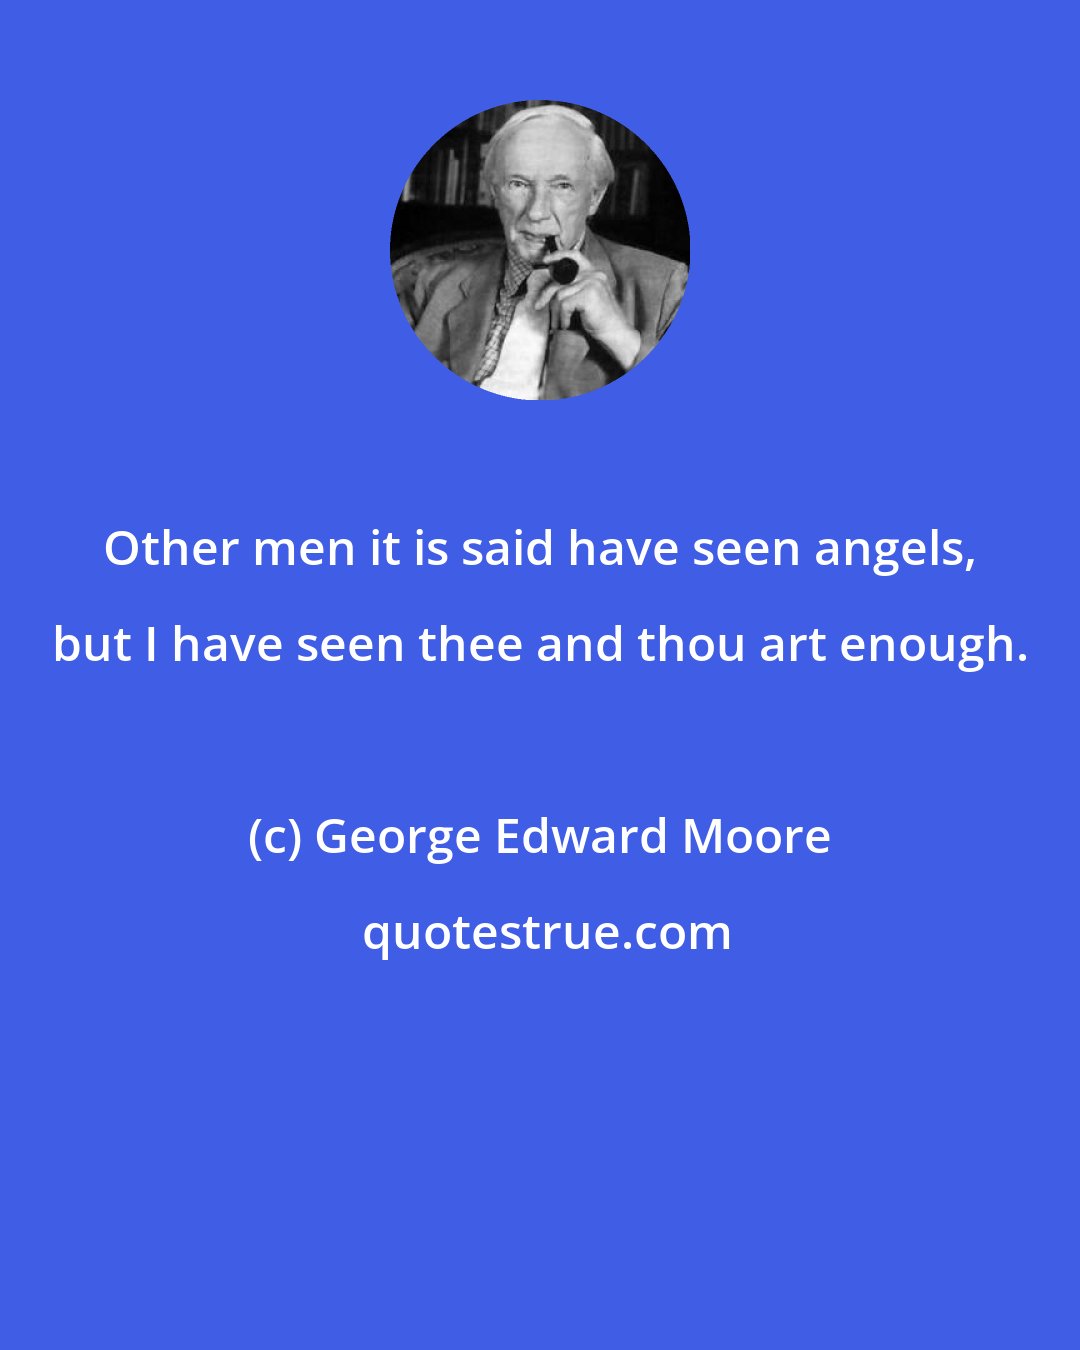 George Edward Moore: Other men it is said have seen angels, but I have seen thee and thou art enough.